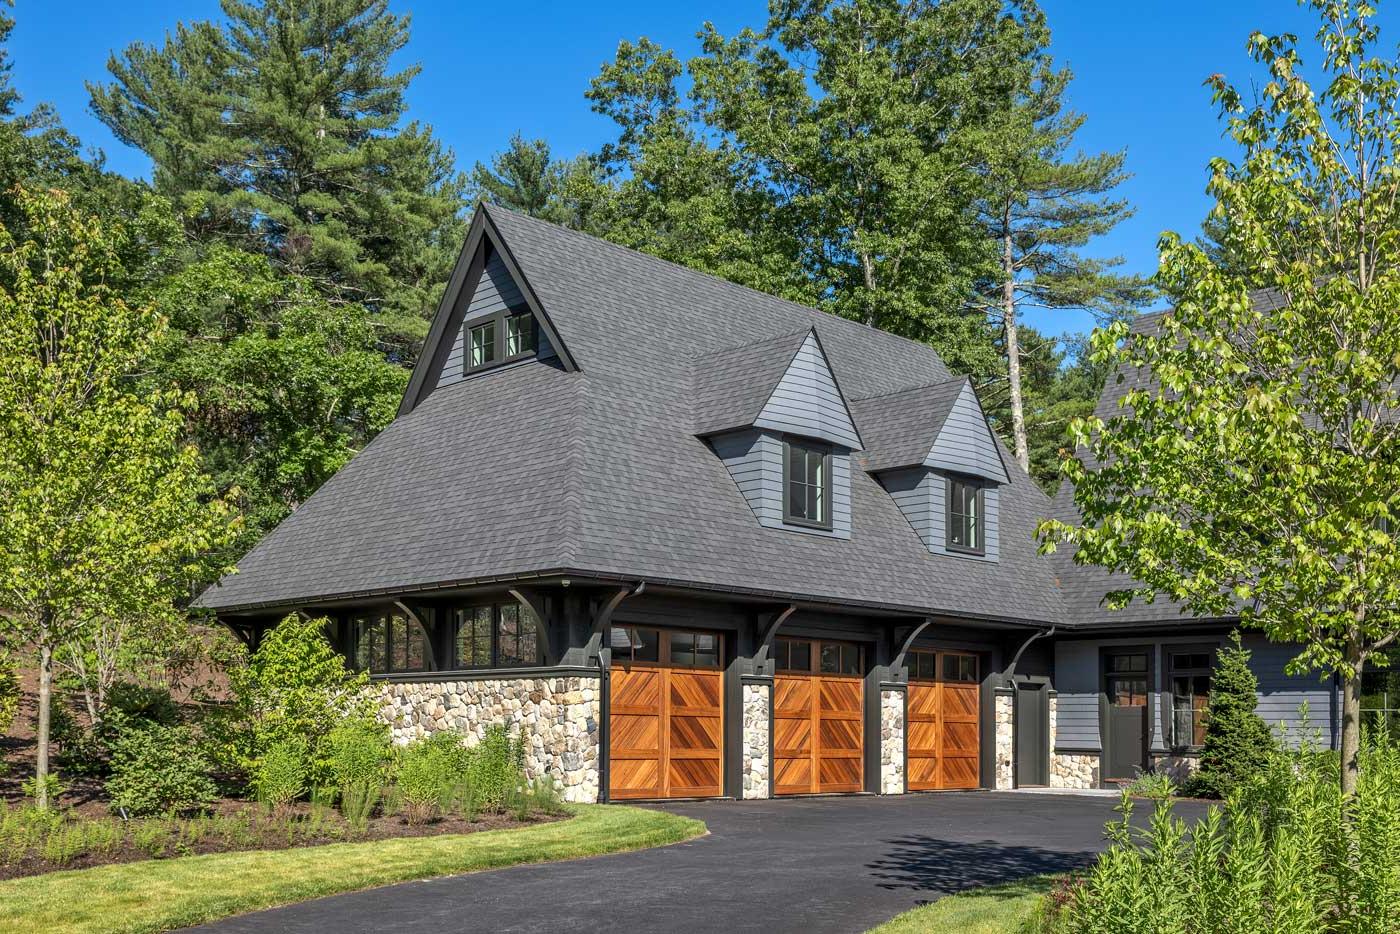 Shingle style home in rural wooded setting - Construction built 3 car garage / basketball court by 林奇建设 & 重构